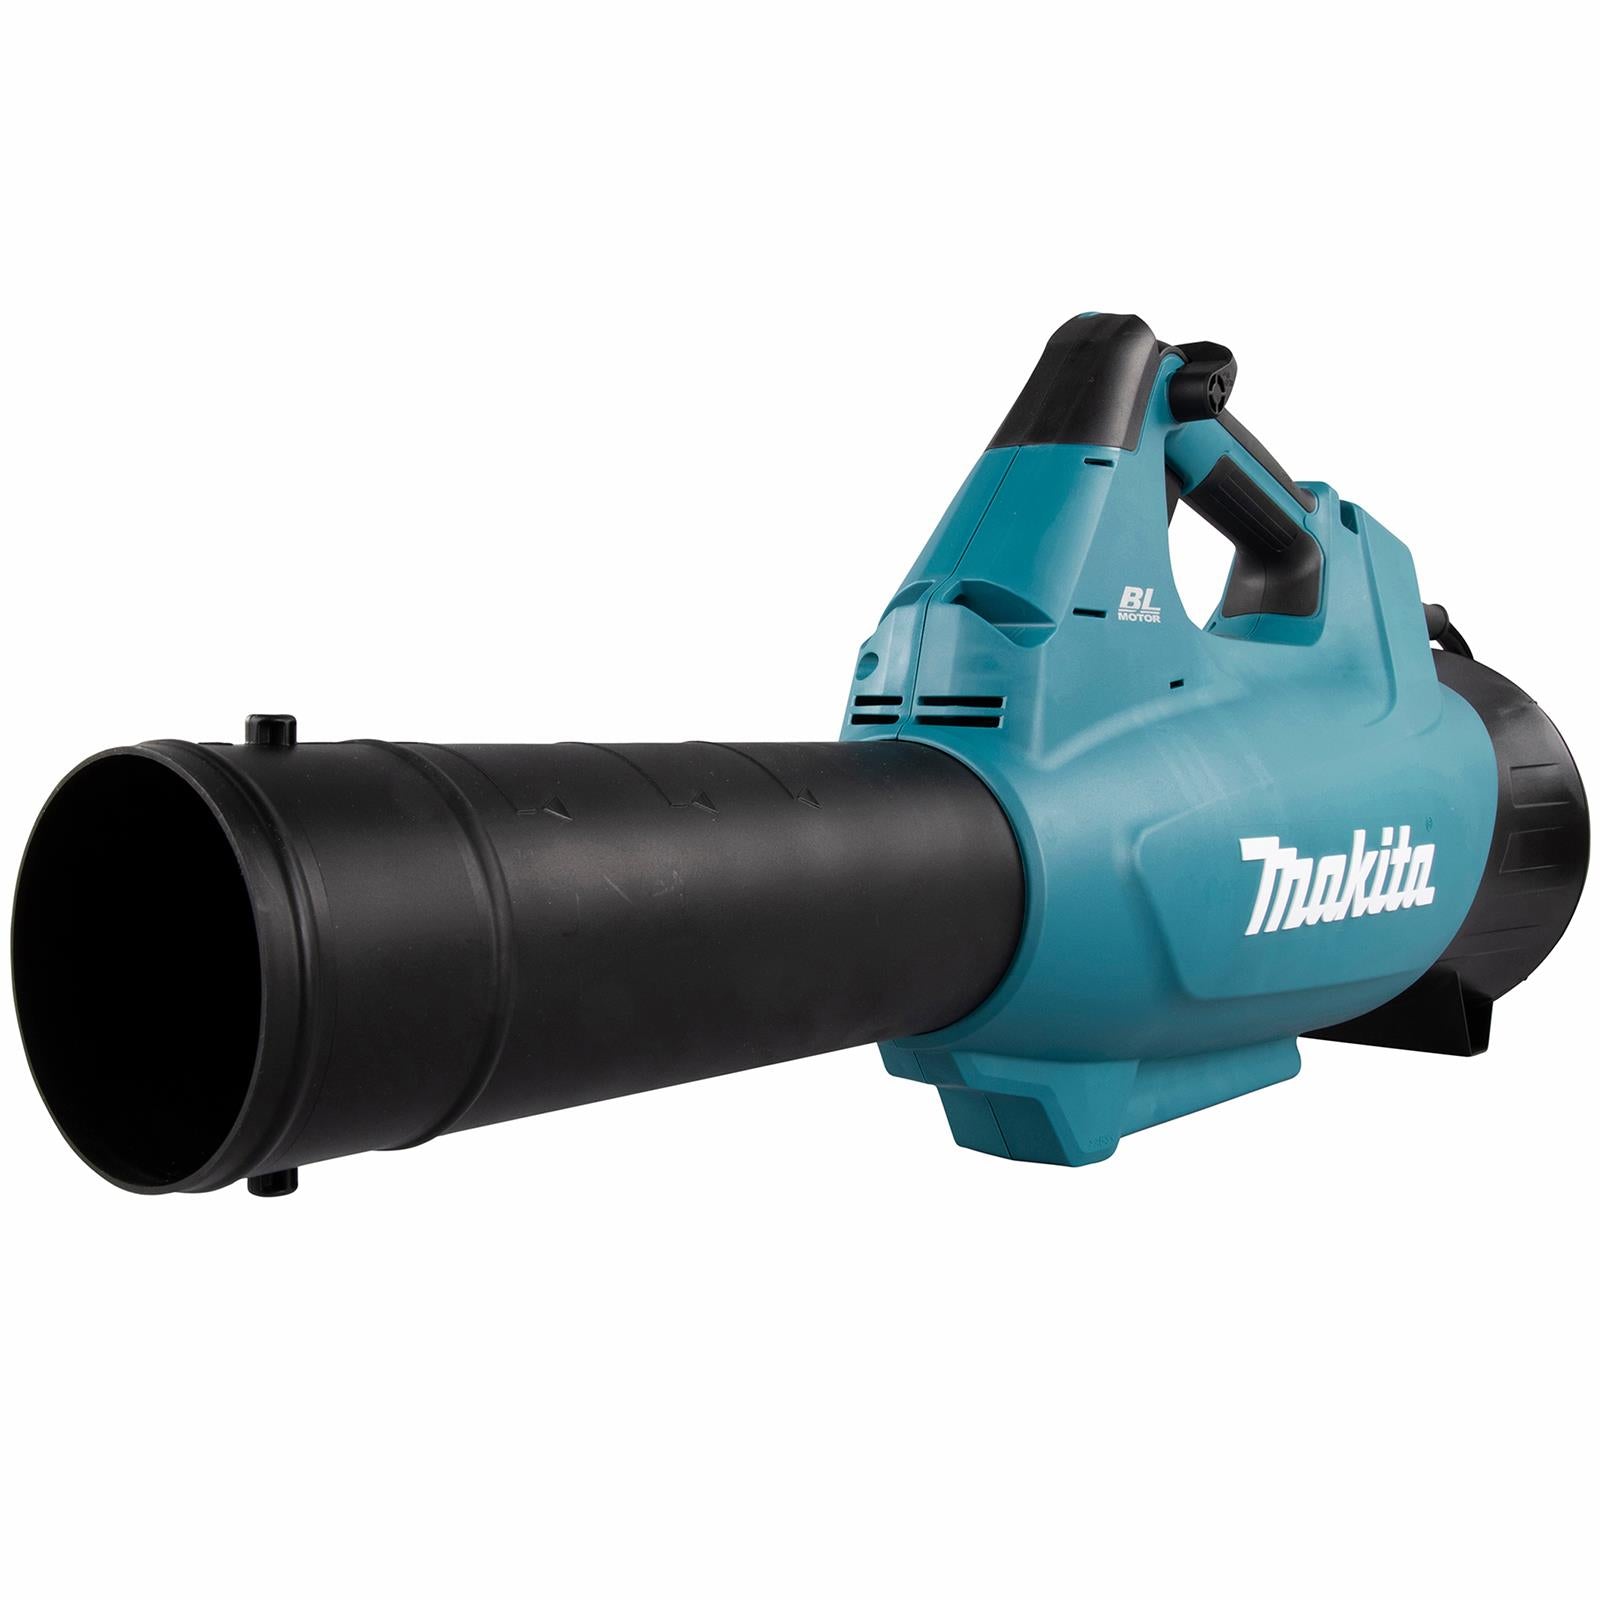 Makita Leaf Blower and PDC1200 Power Pack Backpack 18V 40V LXT XGT Compatible Brushless Cordless 20N Garden Grass Clippings UB001CX2